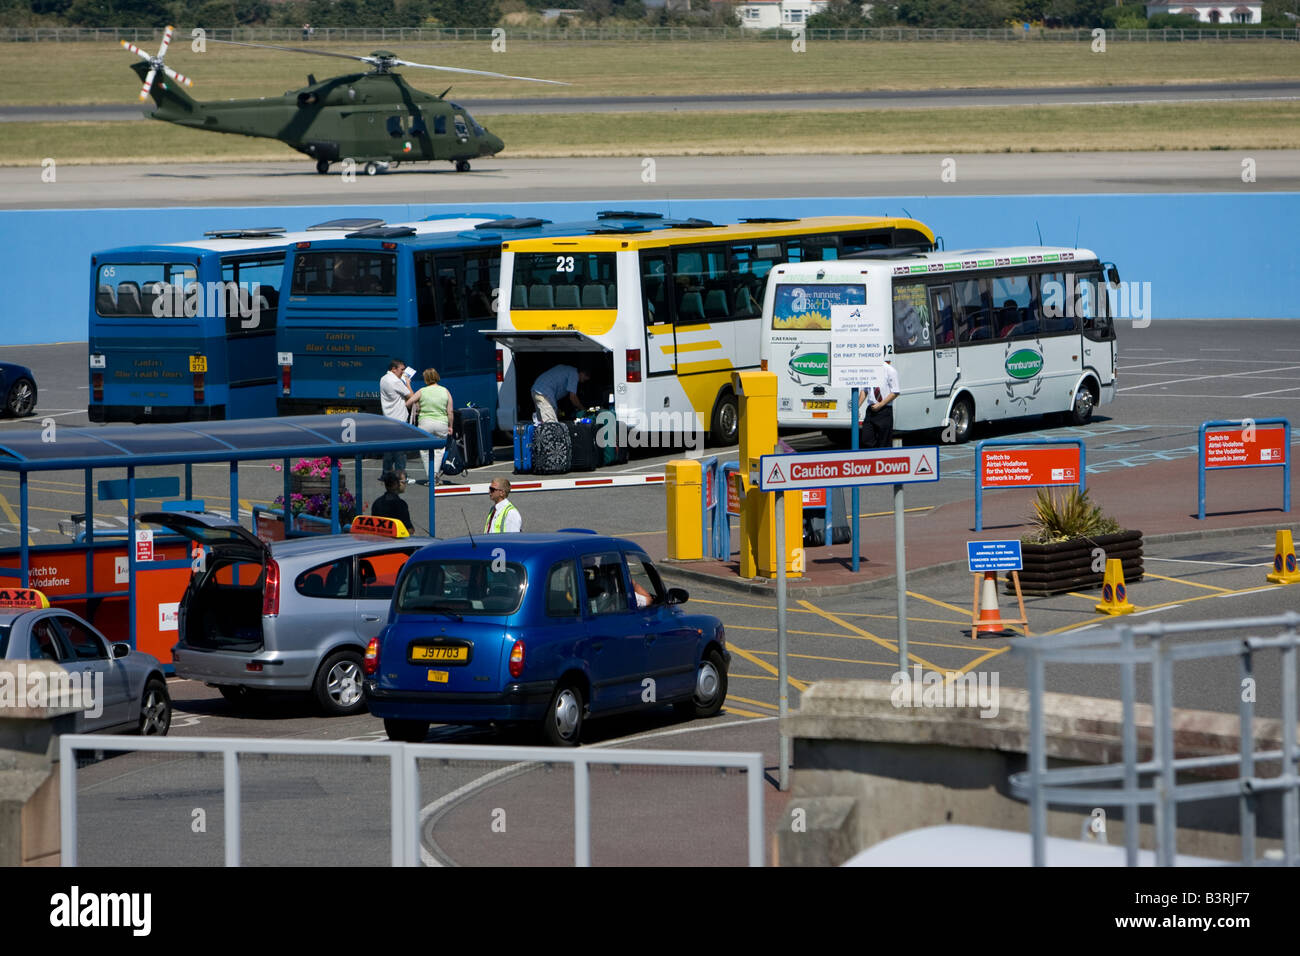 jersey airport bus park taxi helicopter 